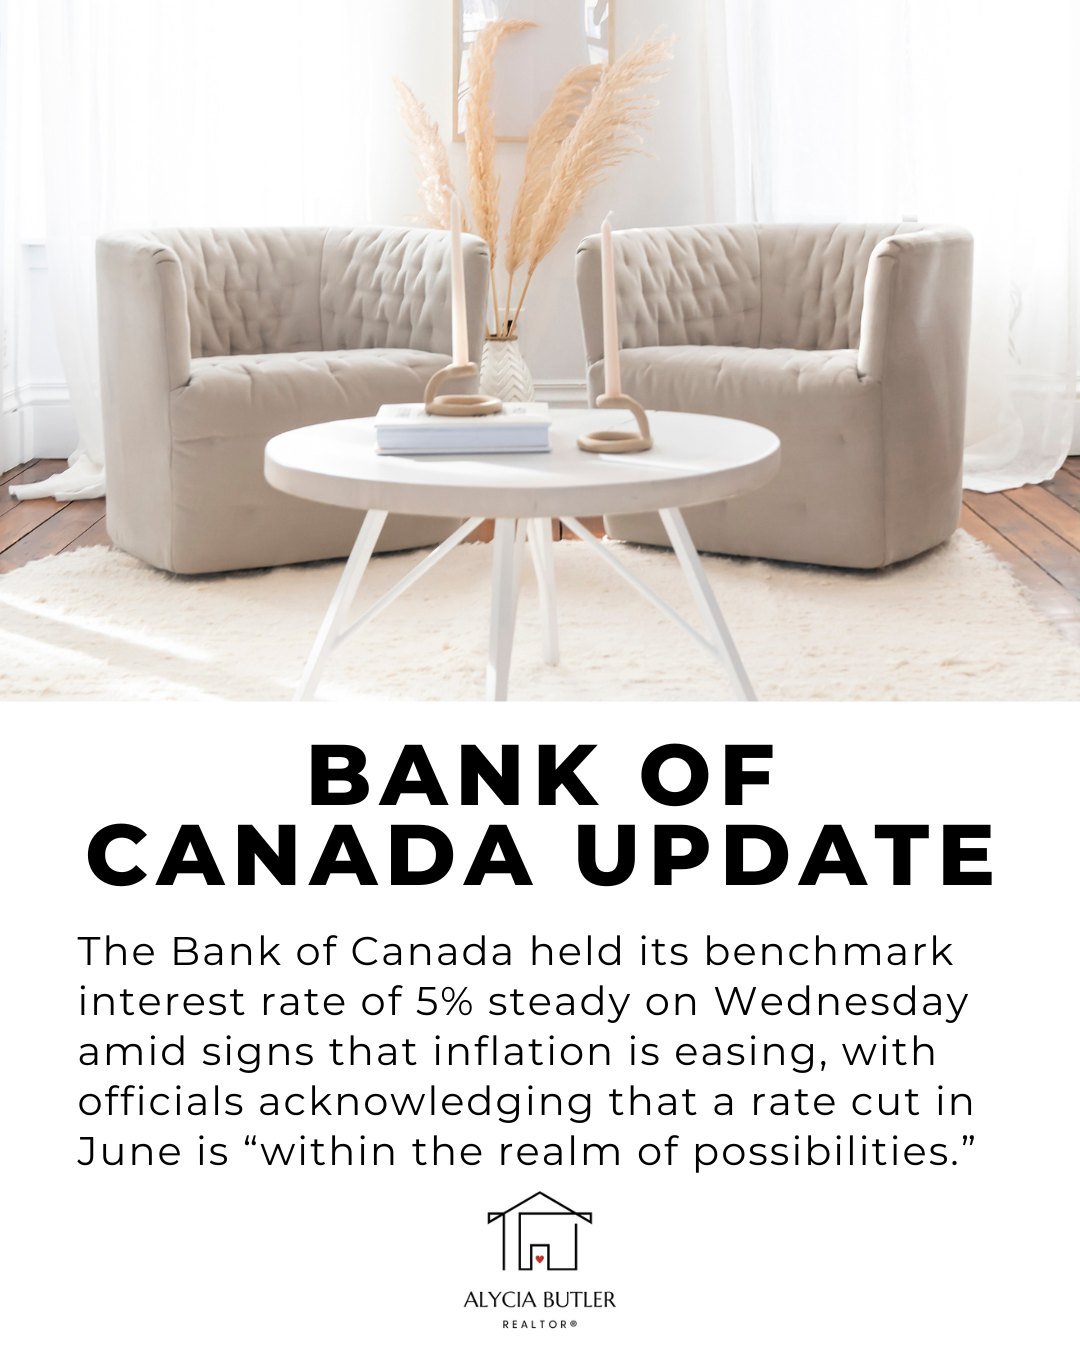 Here is an excerpt from the official Bank of Canada press release:

&quot;The Bank expects the global economy to continue growing at a rate of about 3%, with inflation in most advanced economies easing gradually. 

&bull; Economic growth is forecast 